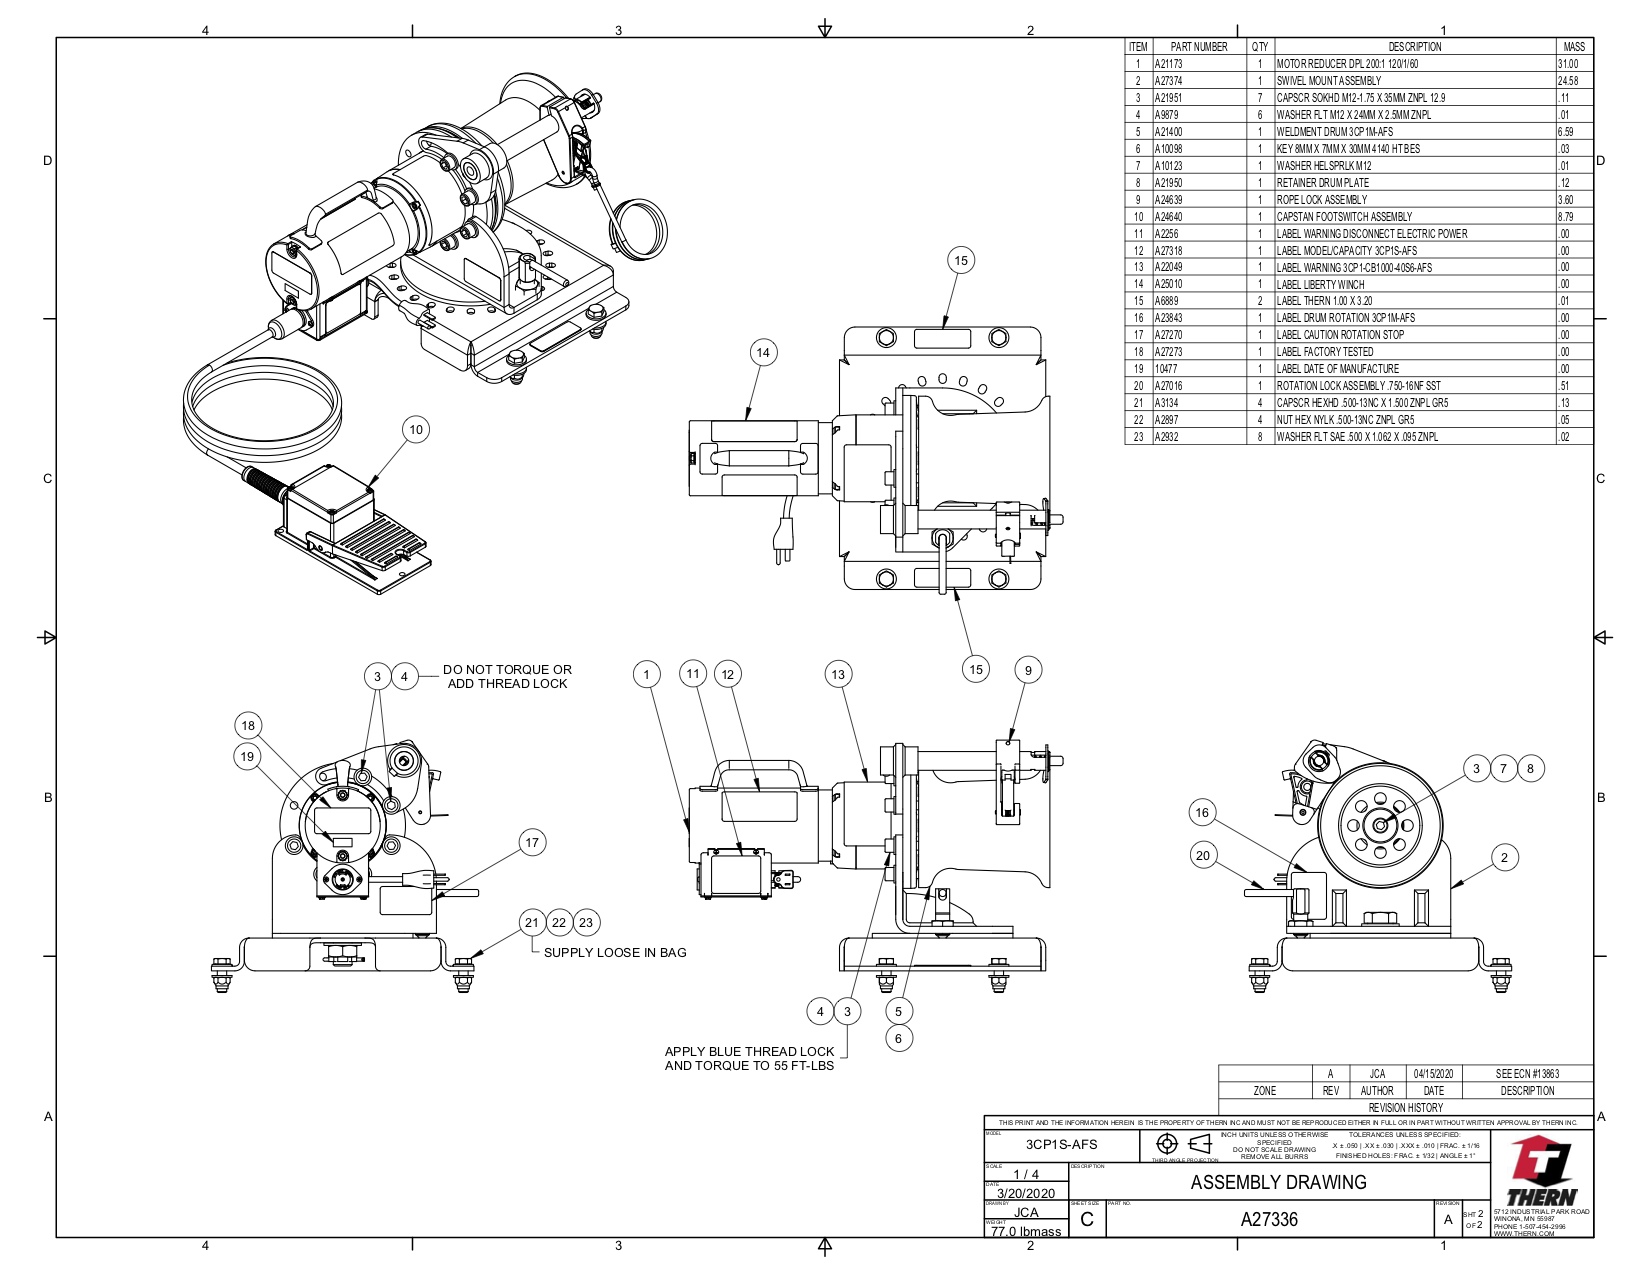 Capstan-Winch-with-Swivel-Base-Drawings-2-V2